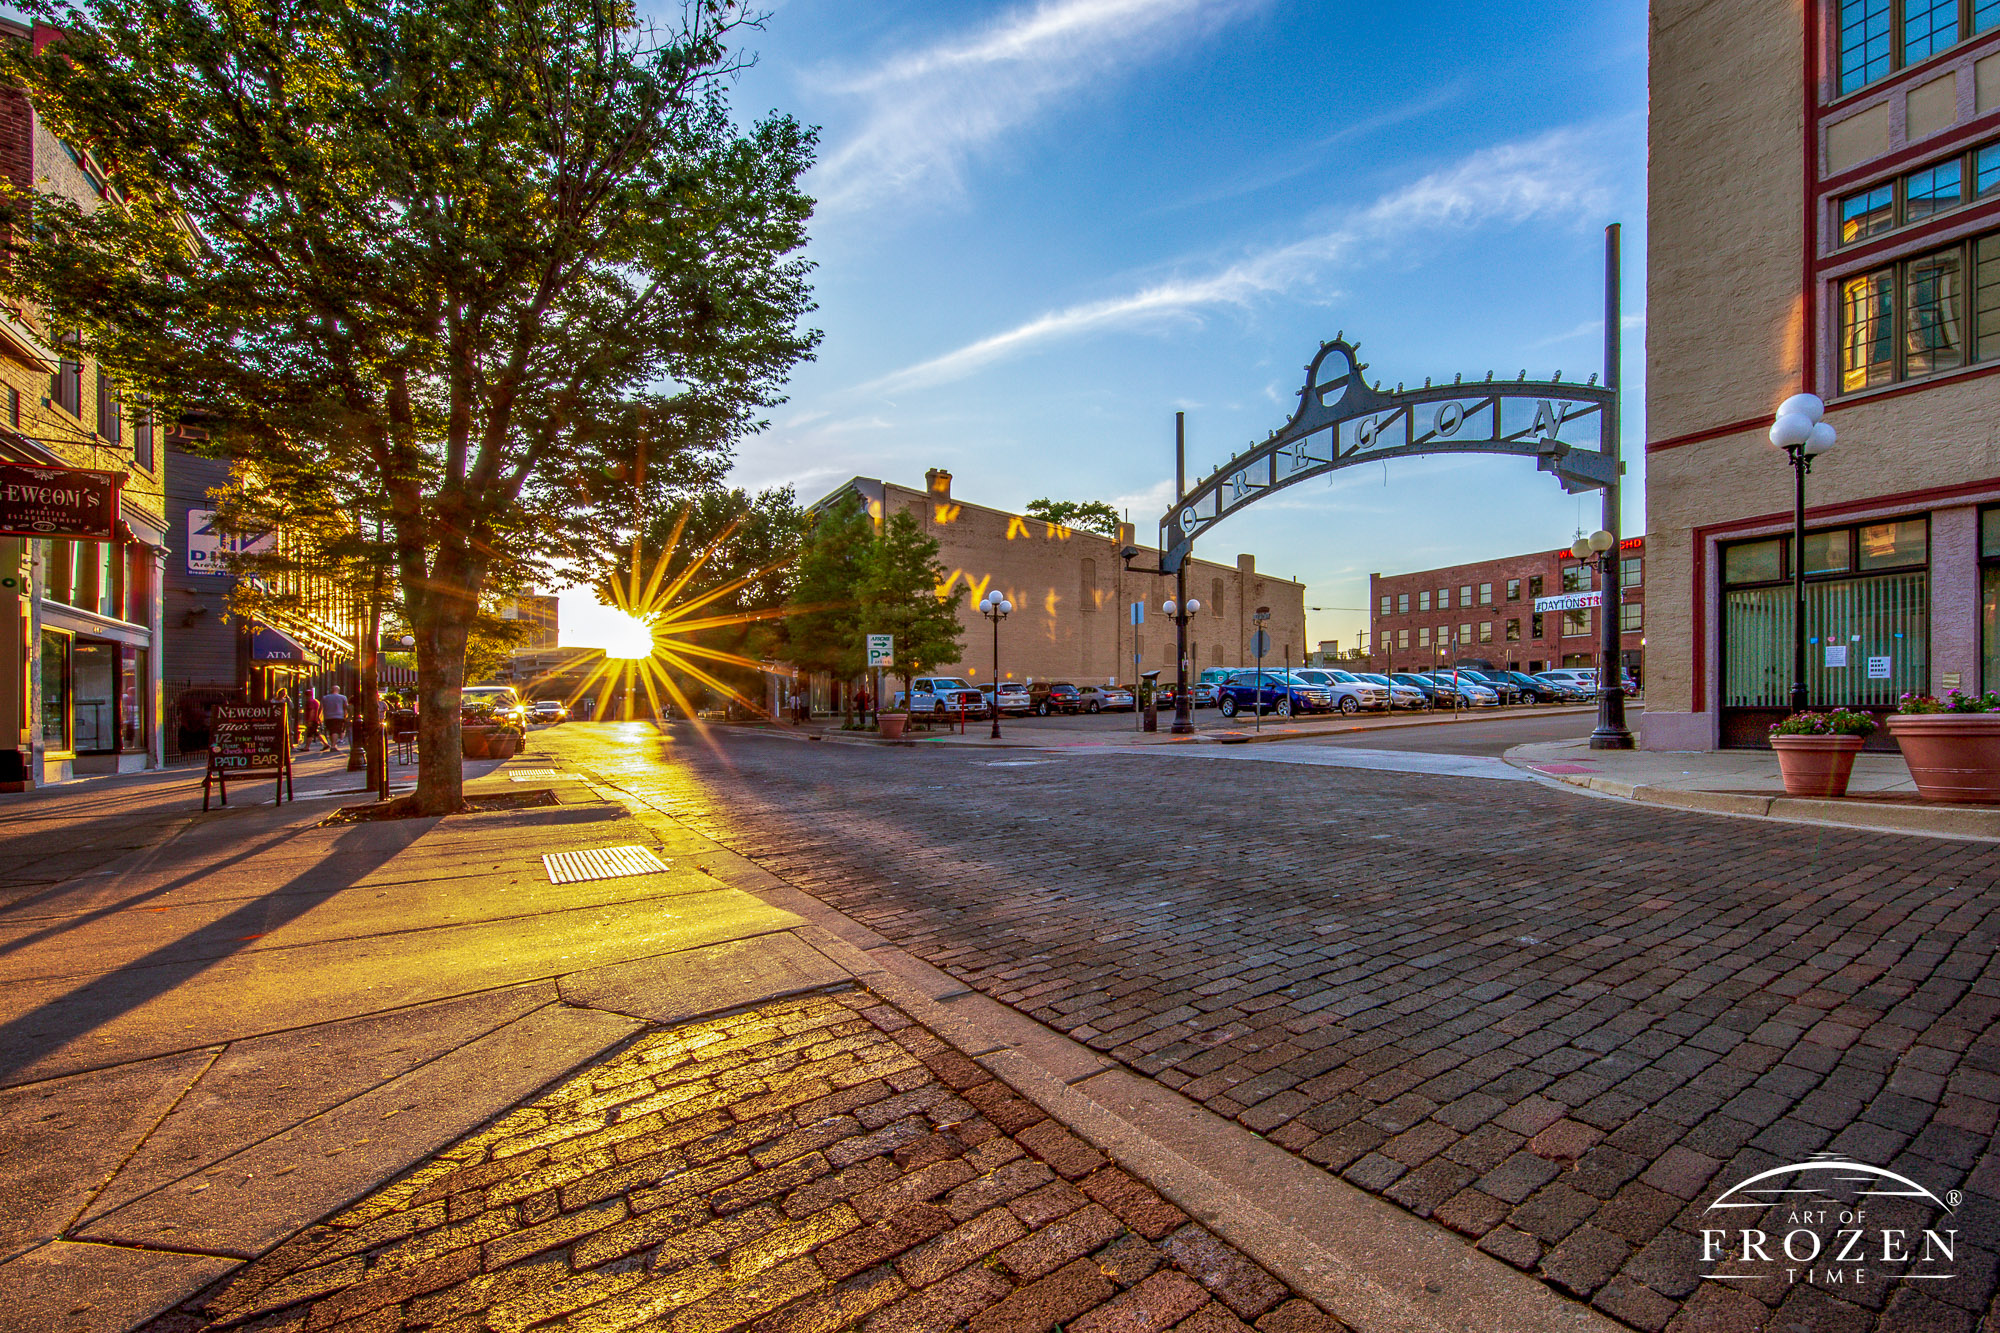 On this summer evening, the sun’s warm rays paint the architectural gem in golden light as the district’s iconic arch sign stands proudly over the brick-paved street